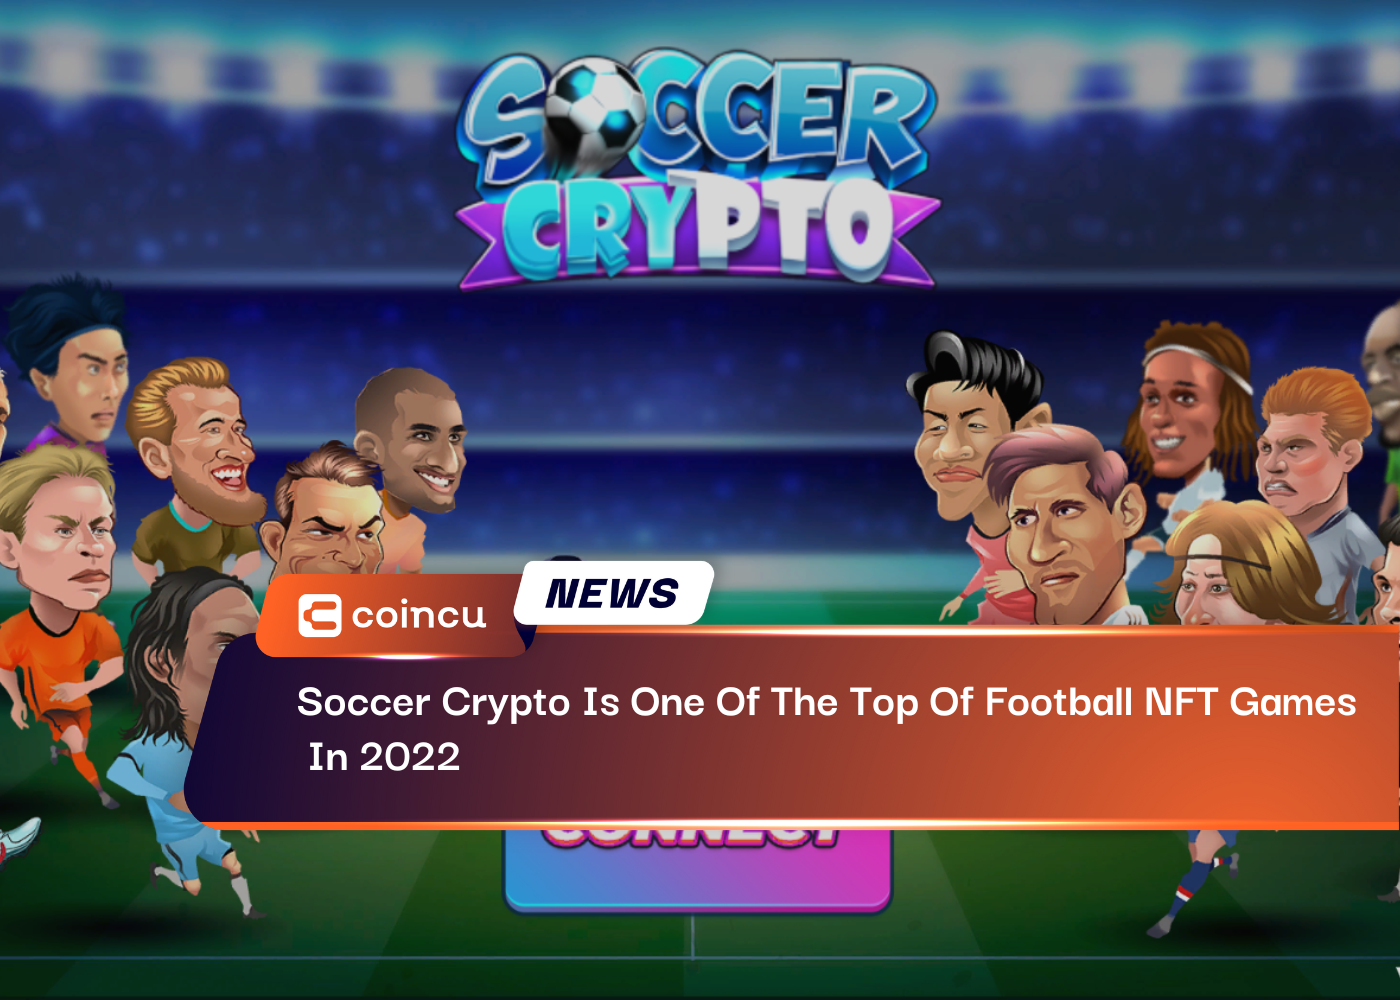 Soccer Crypto Is One Of The Top Of Football NFT Games